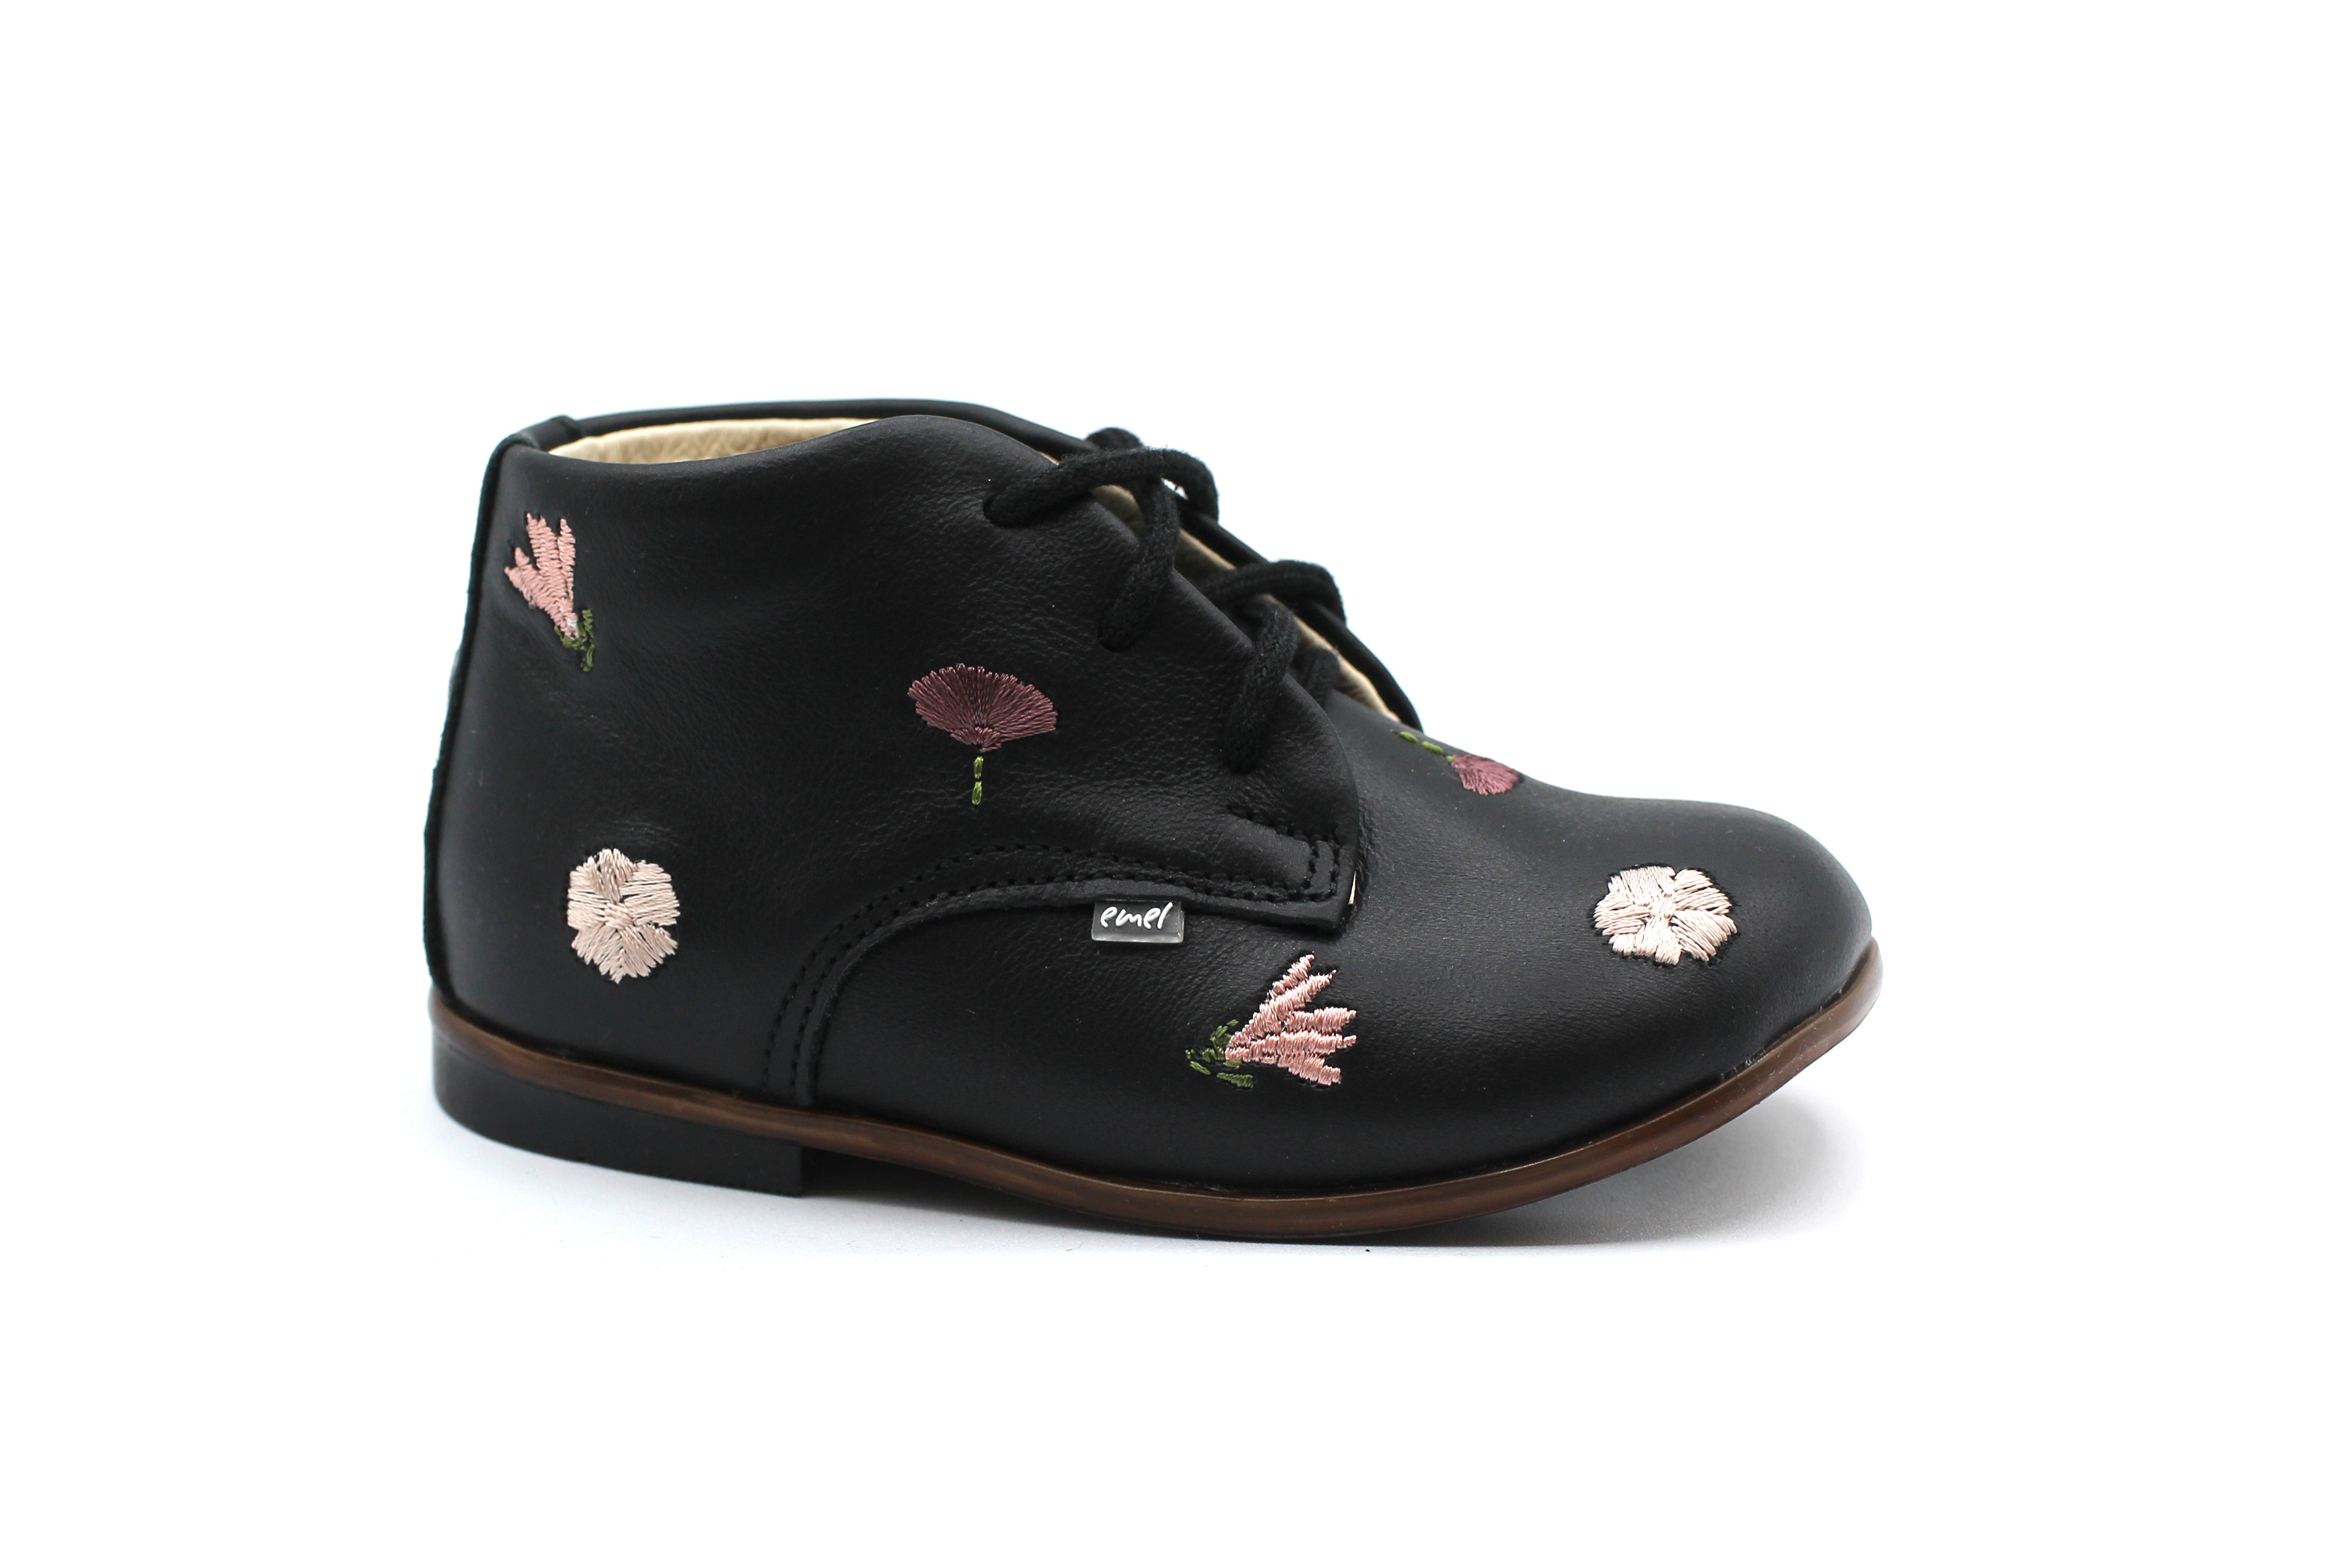 Emel Black Leather With Pink Embroidery Embroidered Bootie